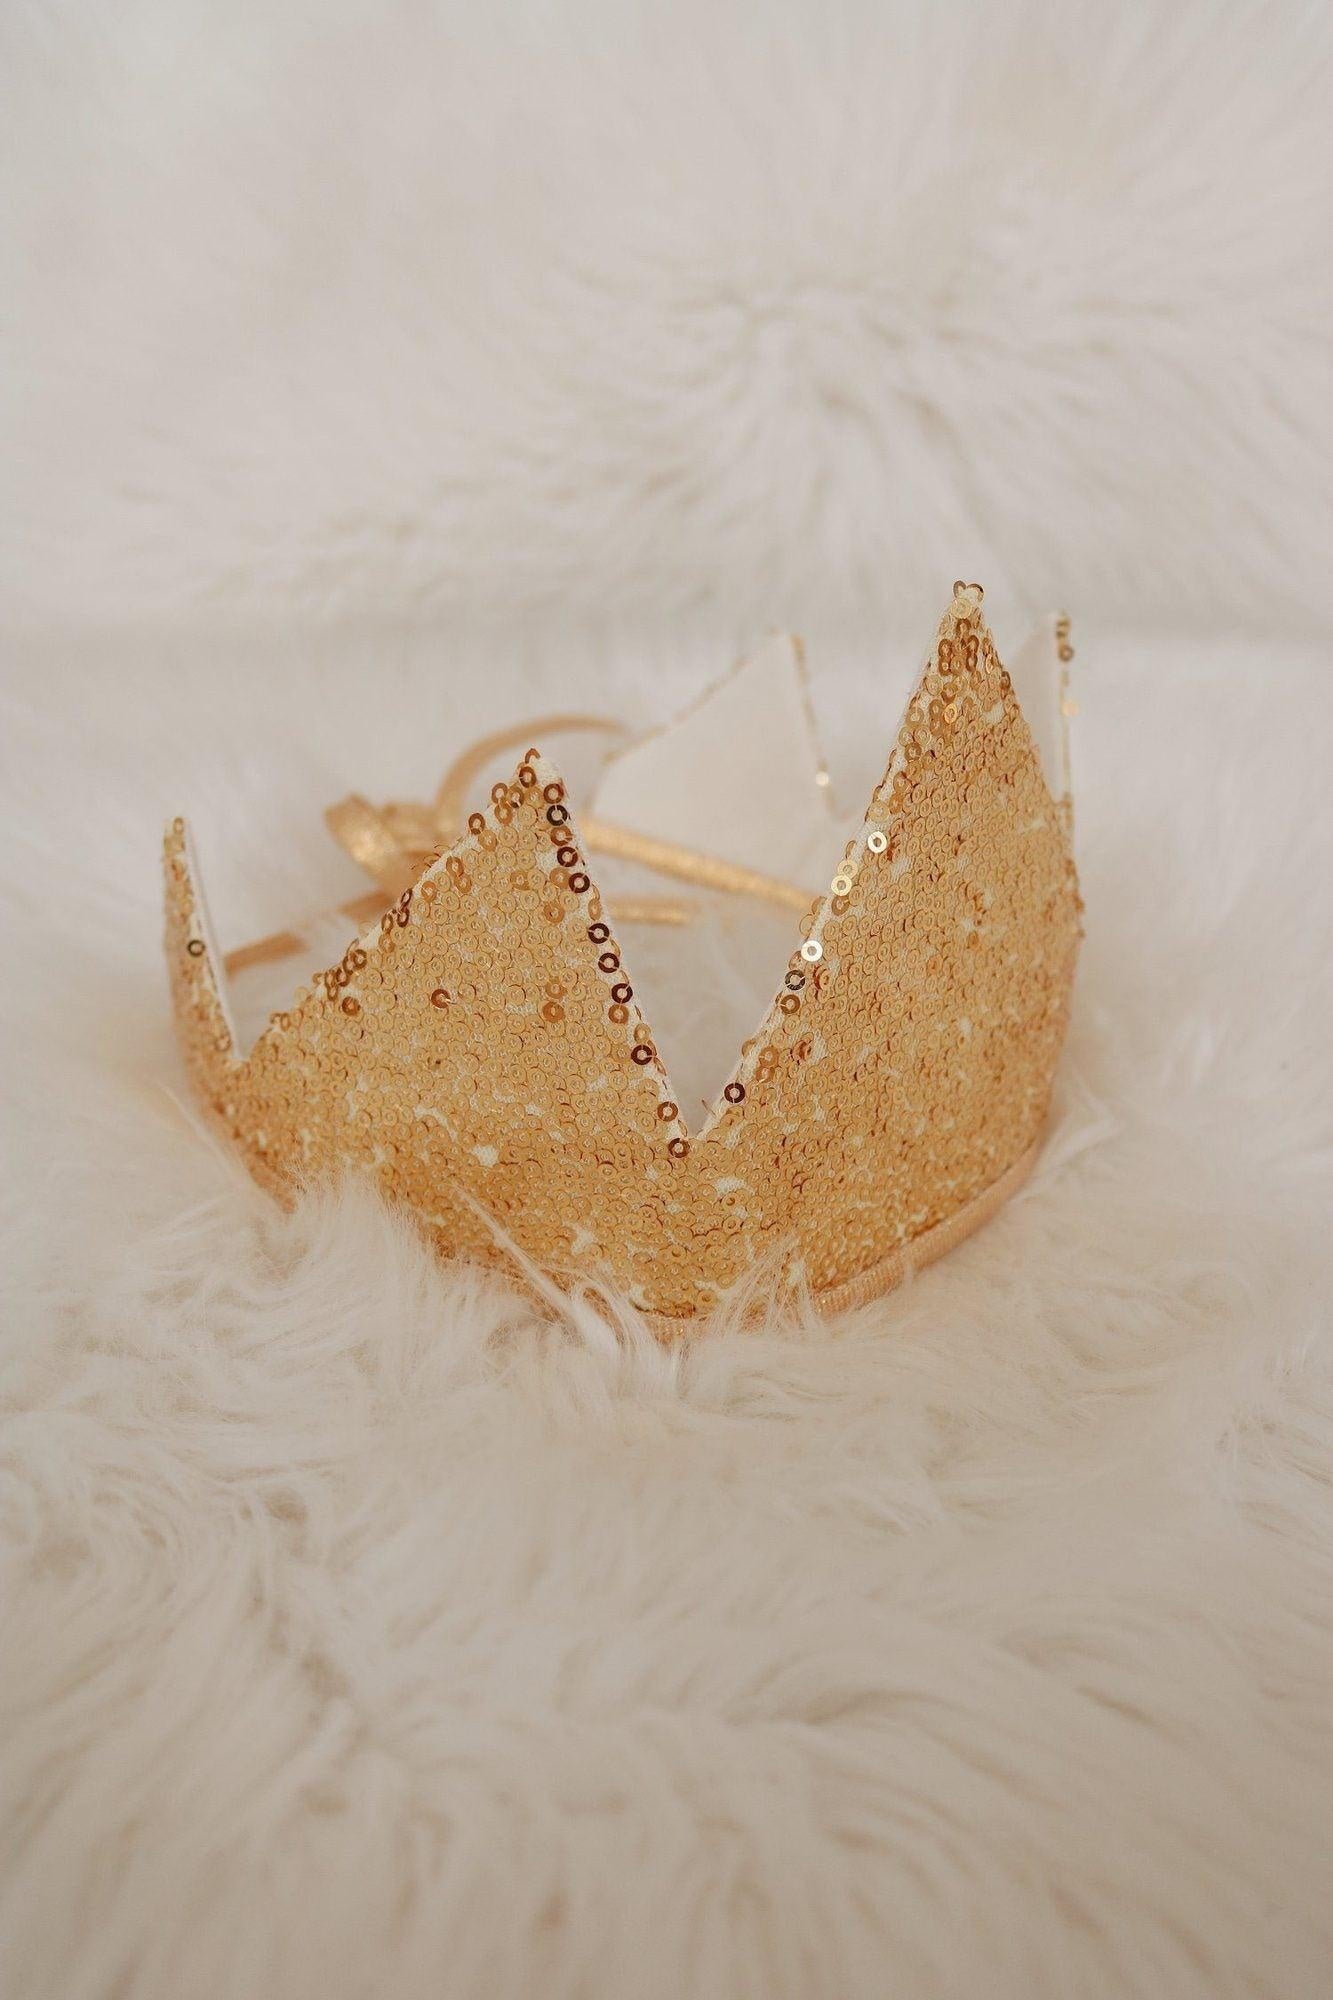 “Gold Sequins” Crown by Moi Mili